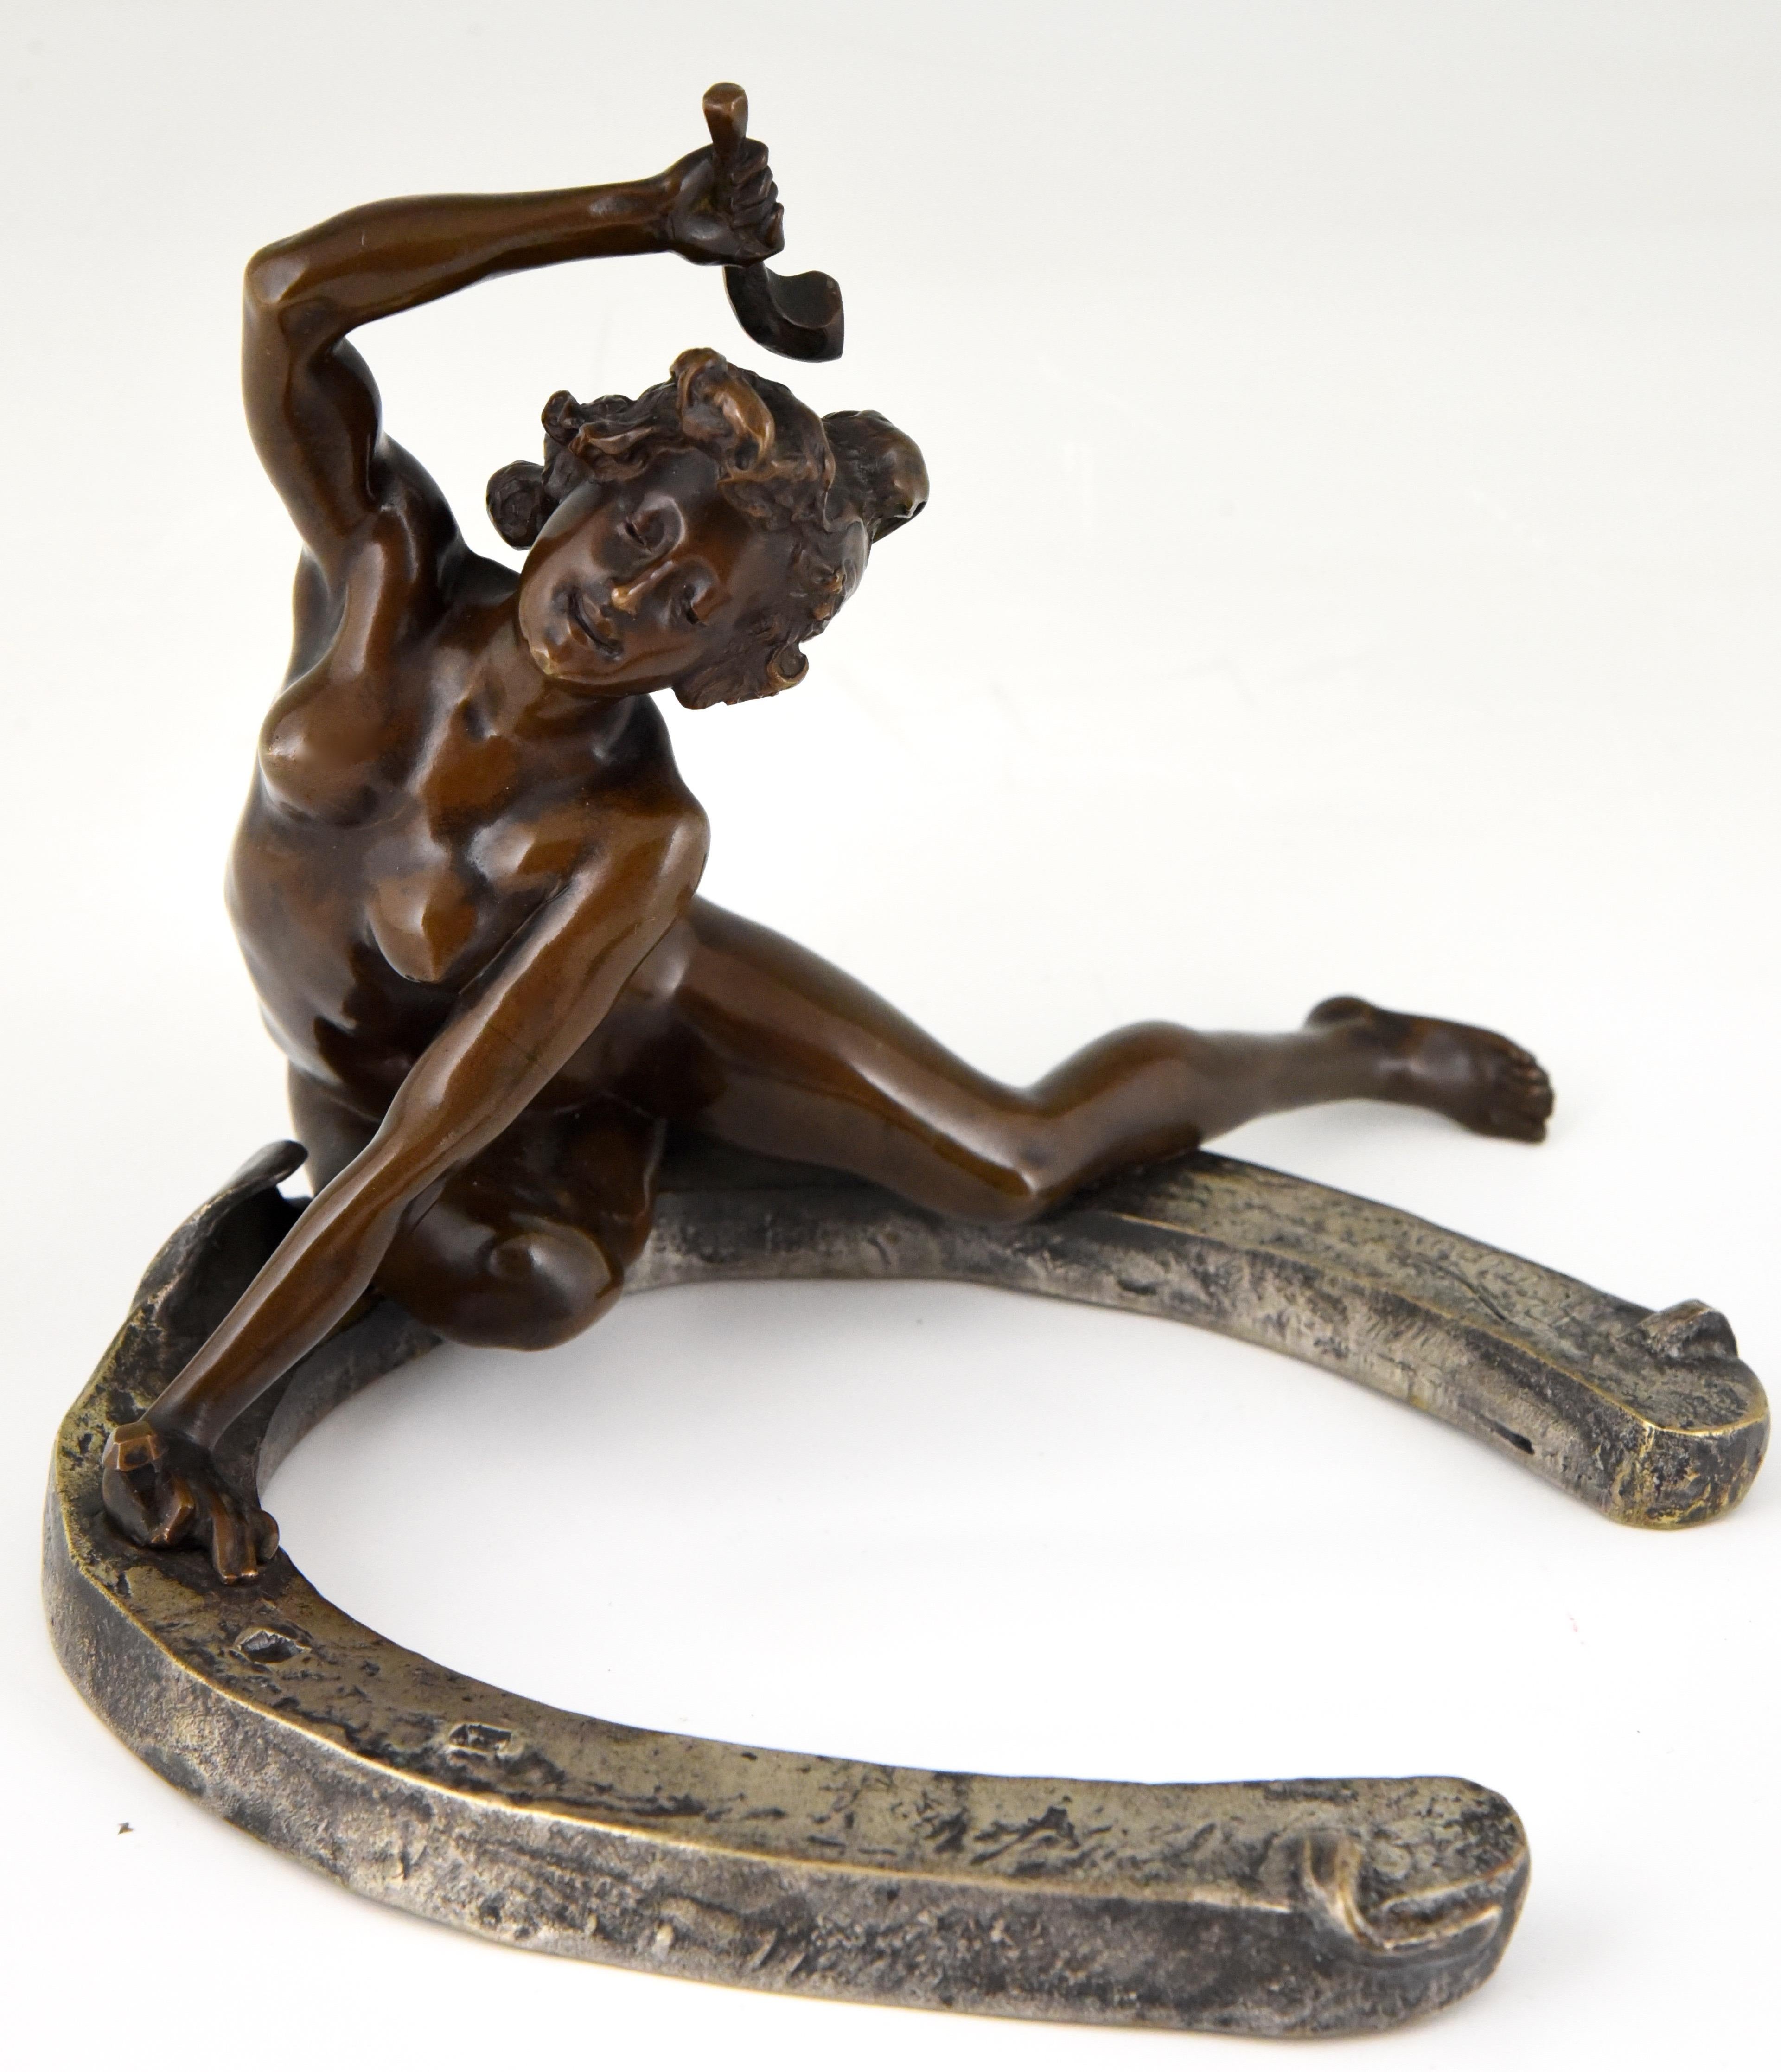 Art Nouveau bronze sculpture of a nude sitting on a horseshoe. The bronze is signed by the French artist Geroges Récipon and stamped by the founder Susse Freres. The bronze has a lovely patina. This model exists in two sizes, this is the largest